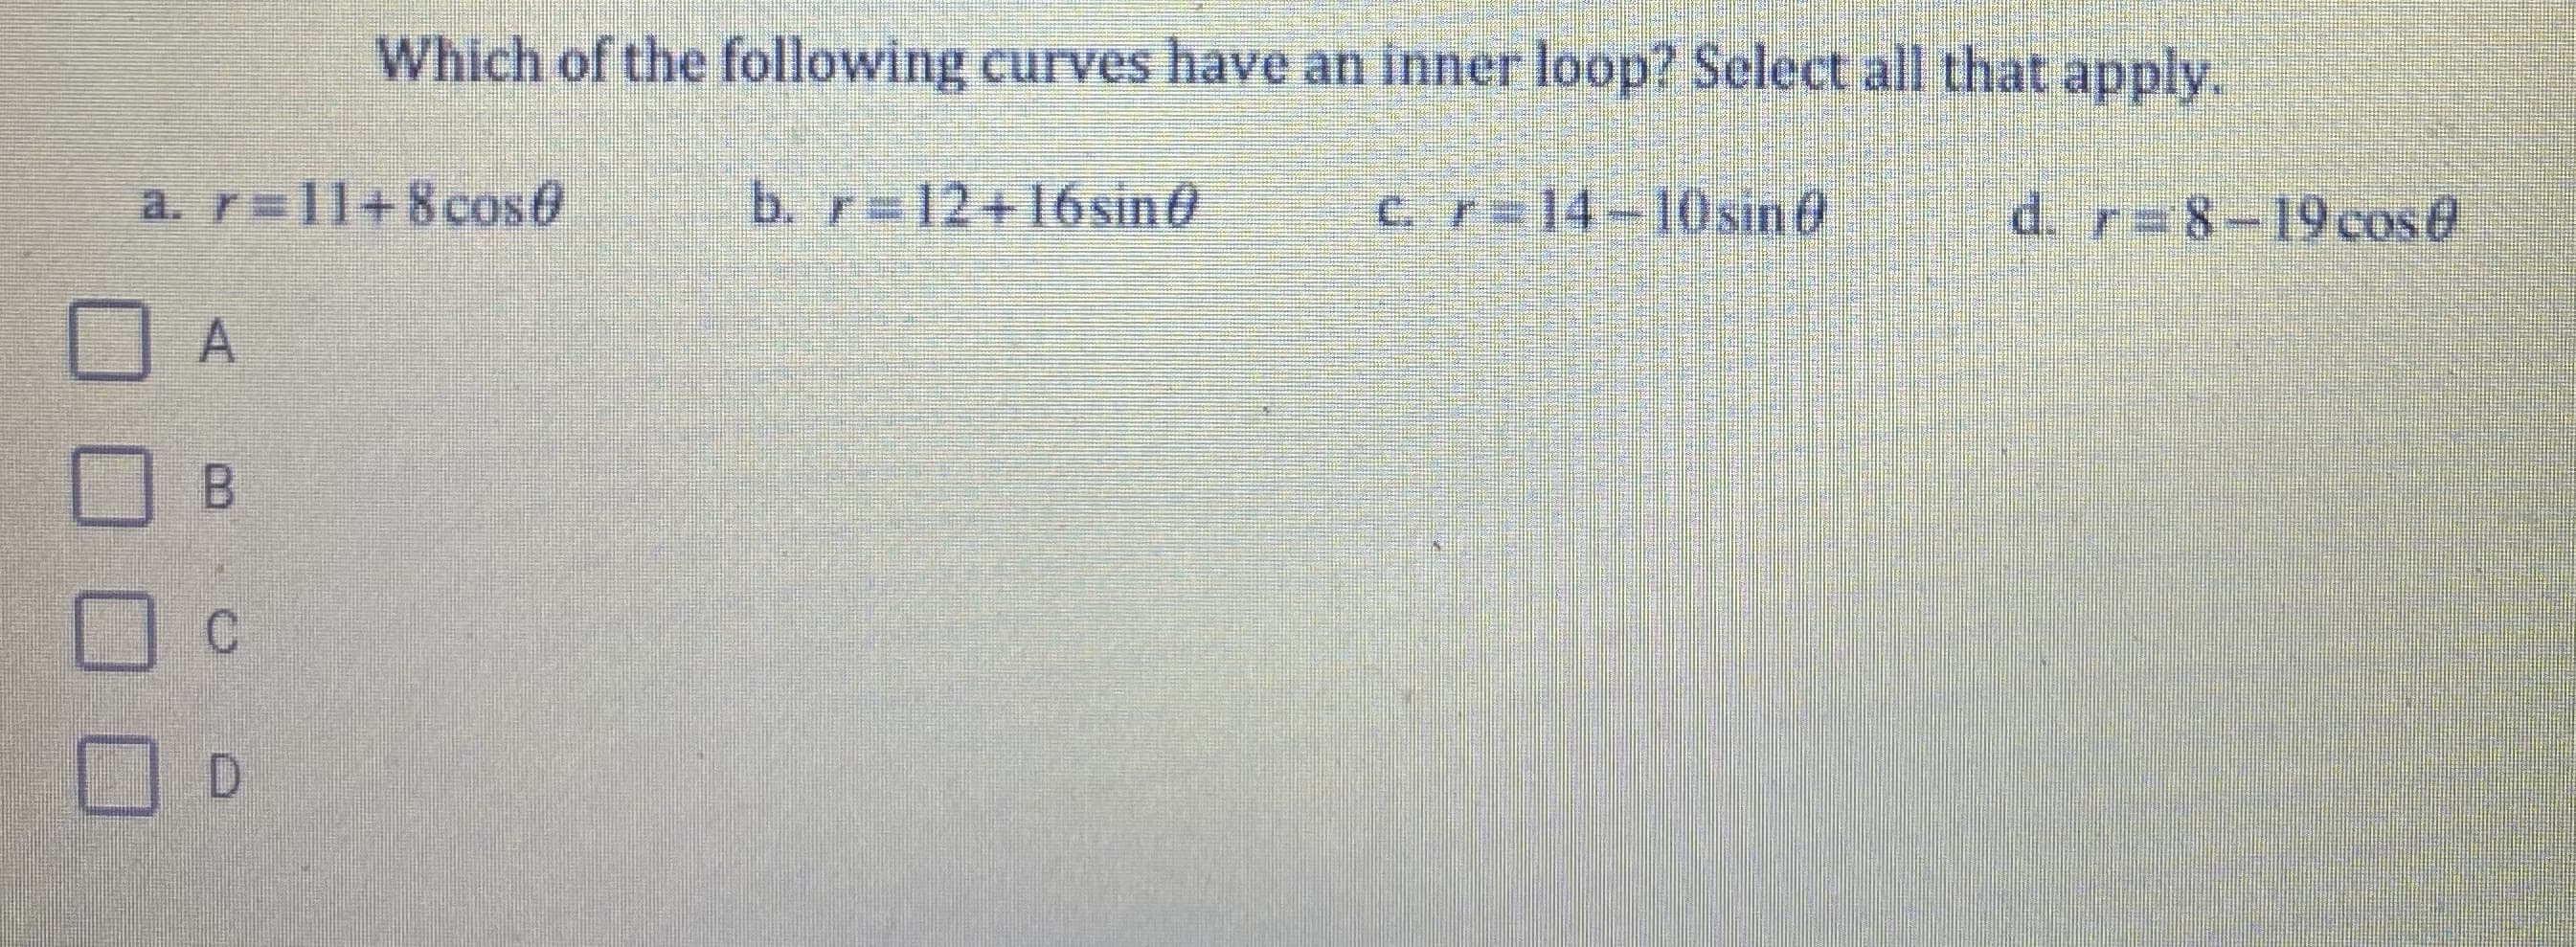 Which of the following curves have an inner loop? Select all that apply.
a. r=11+8cose
b. r=12+16sin0
cr=14-10sind
d. r= 8-19ecos@
C.
